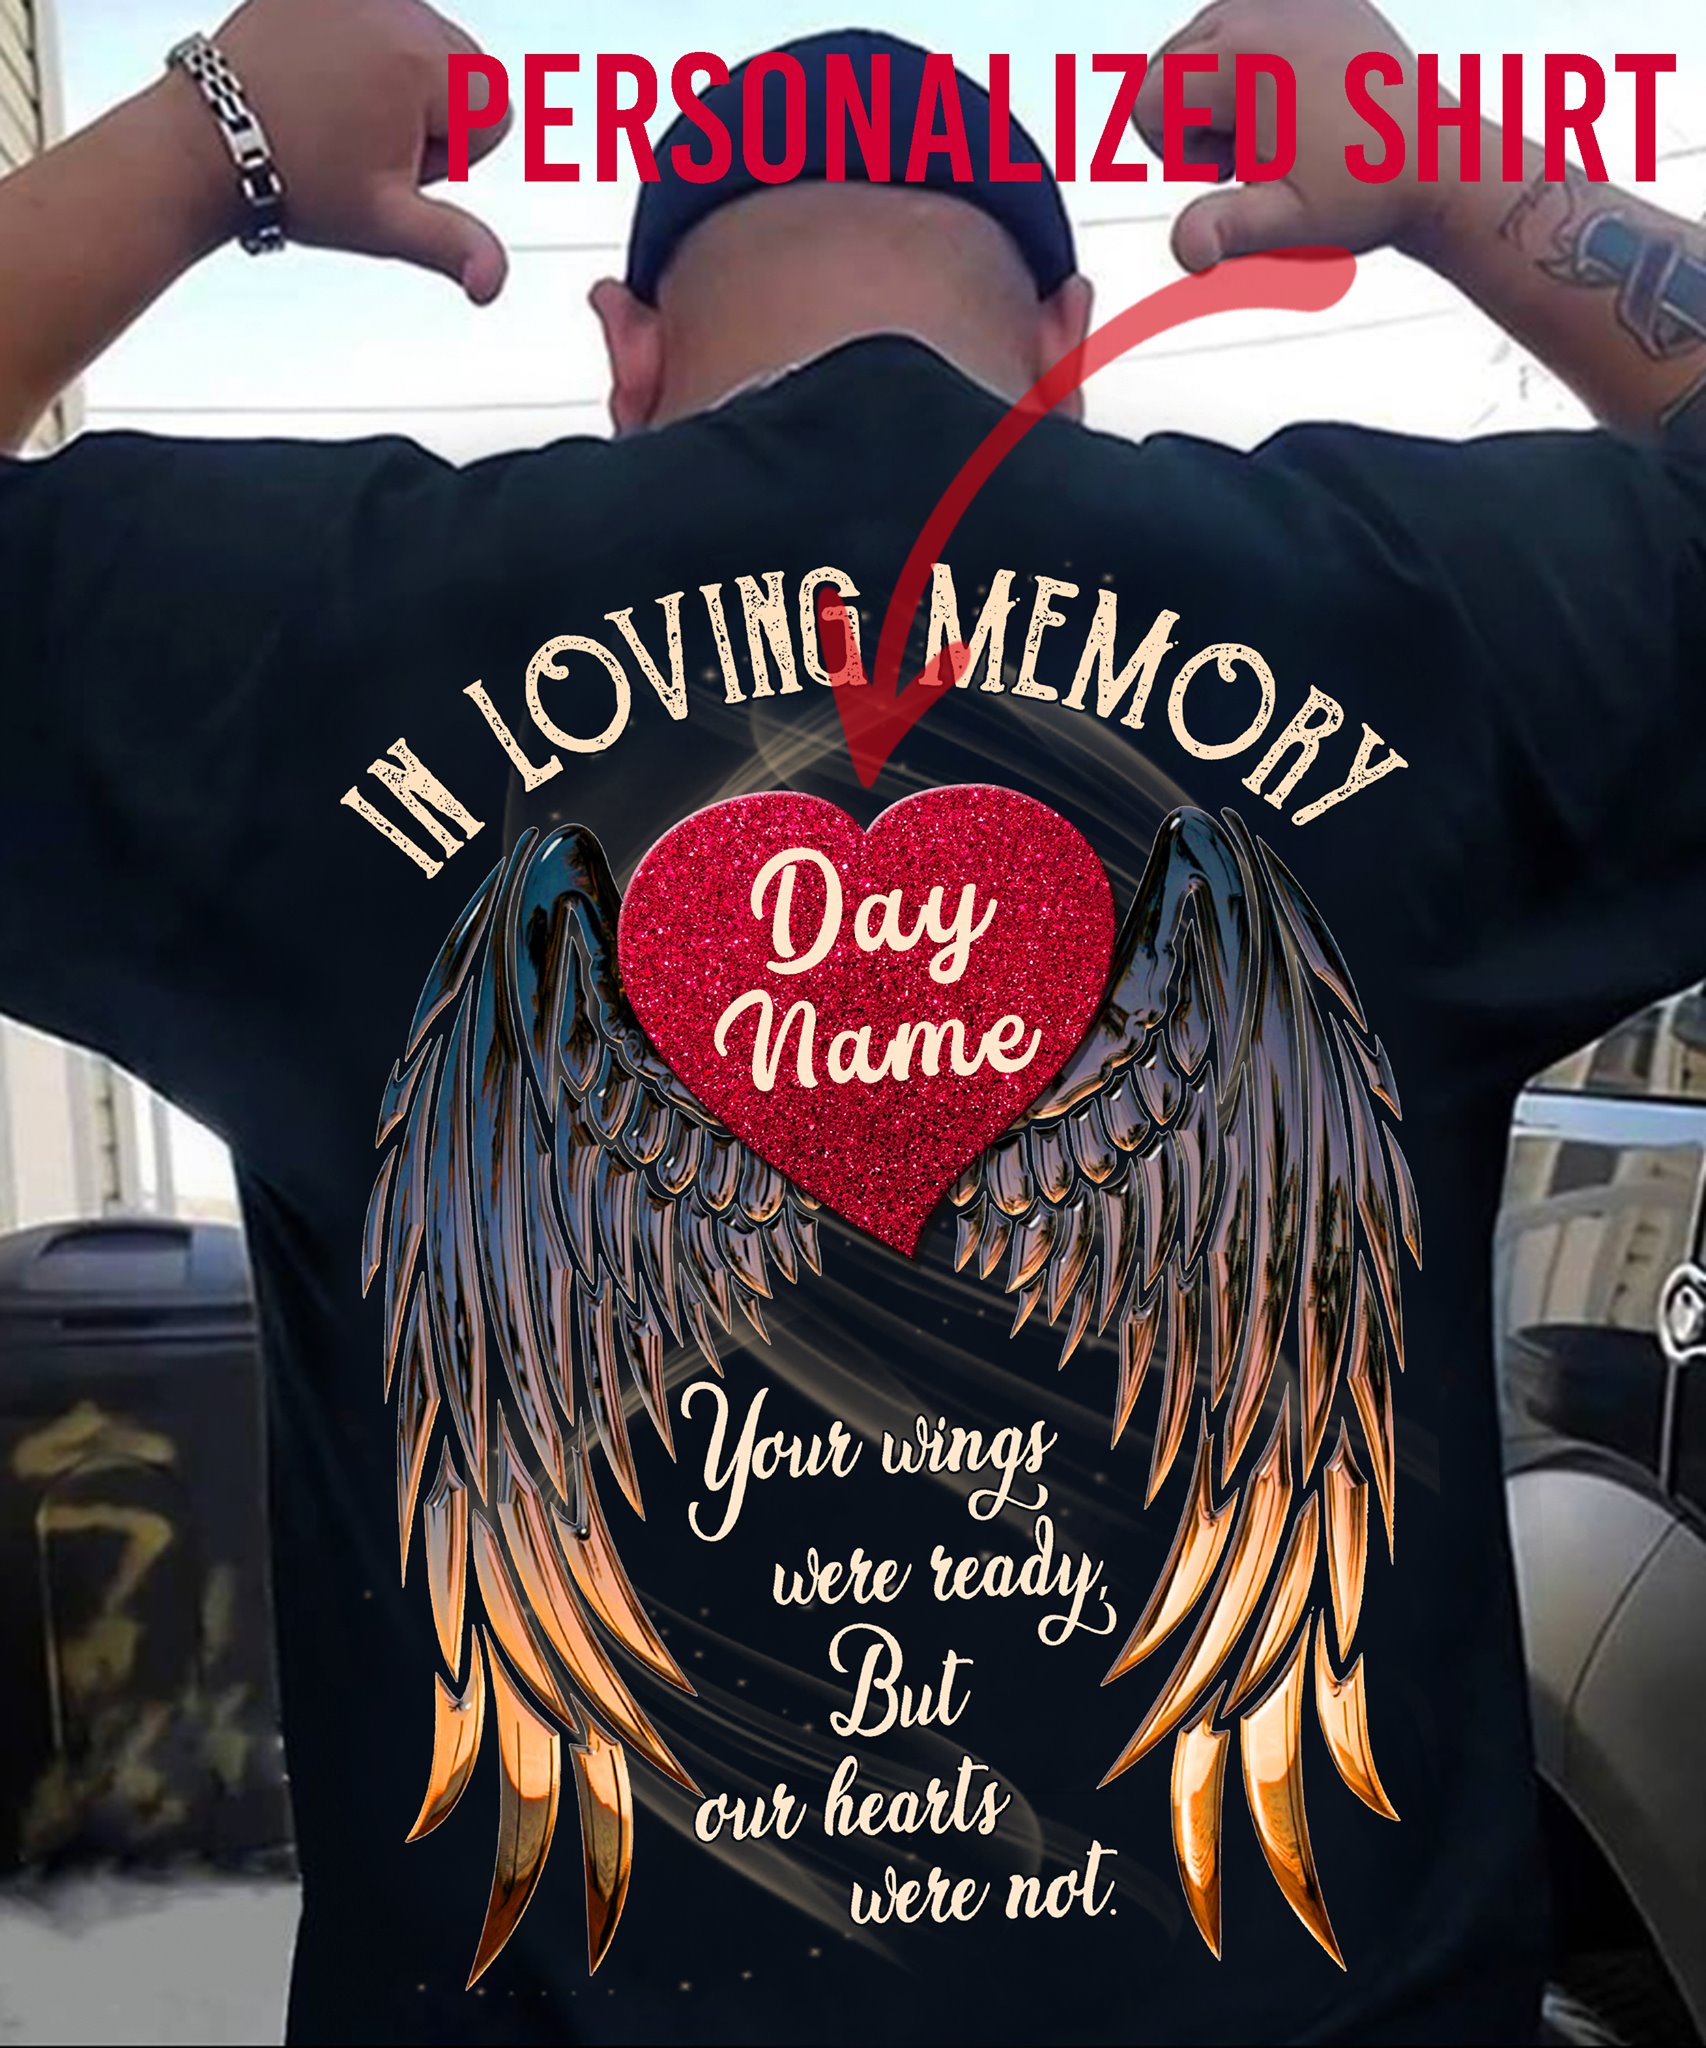 In loving memory. Day name. your wings were ready but our hearts were not